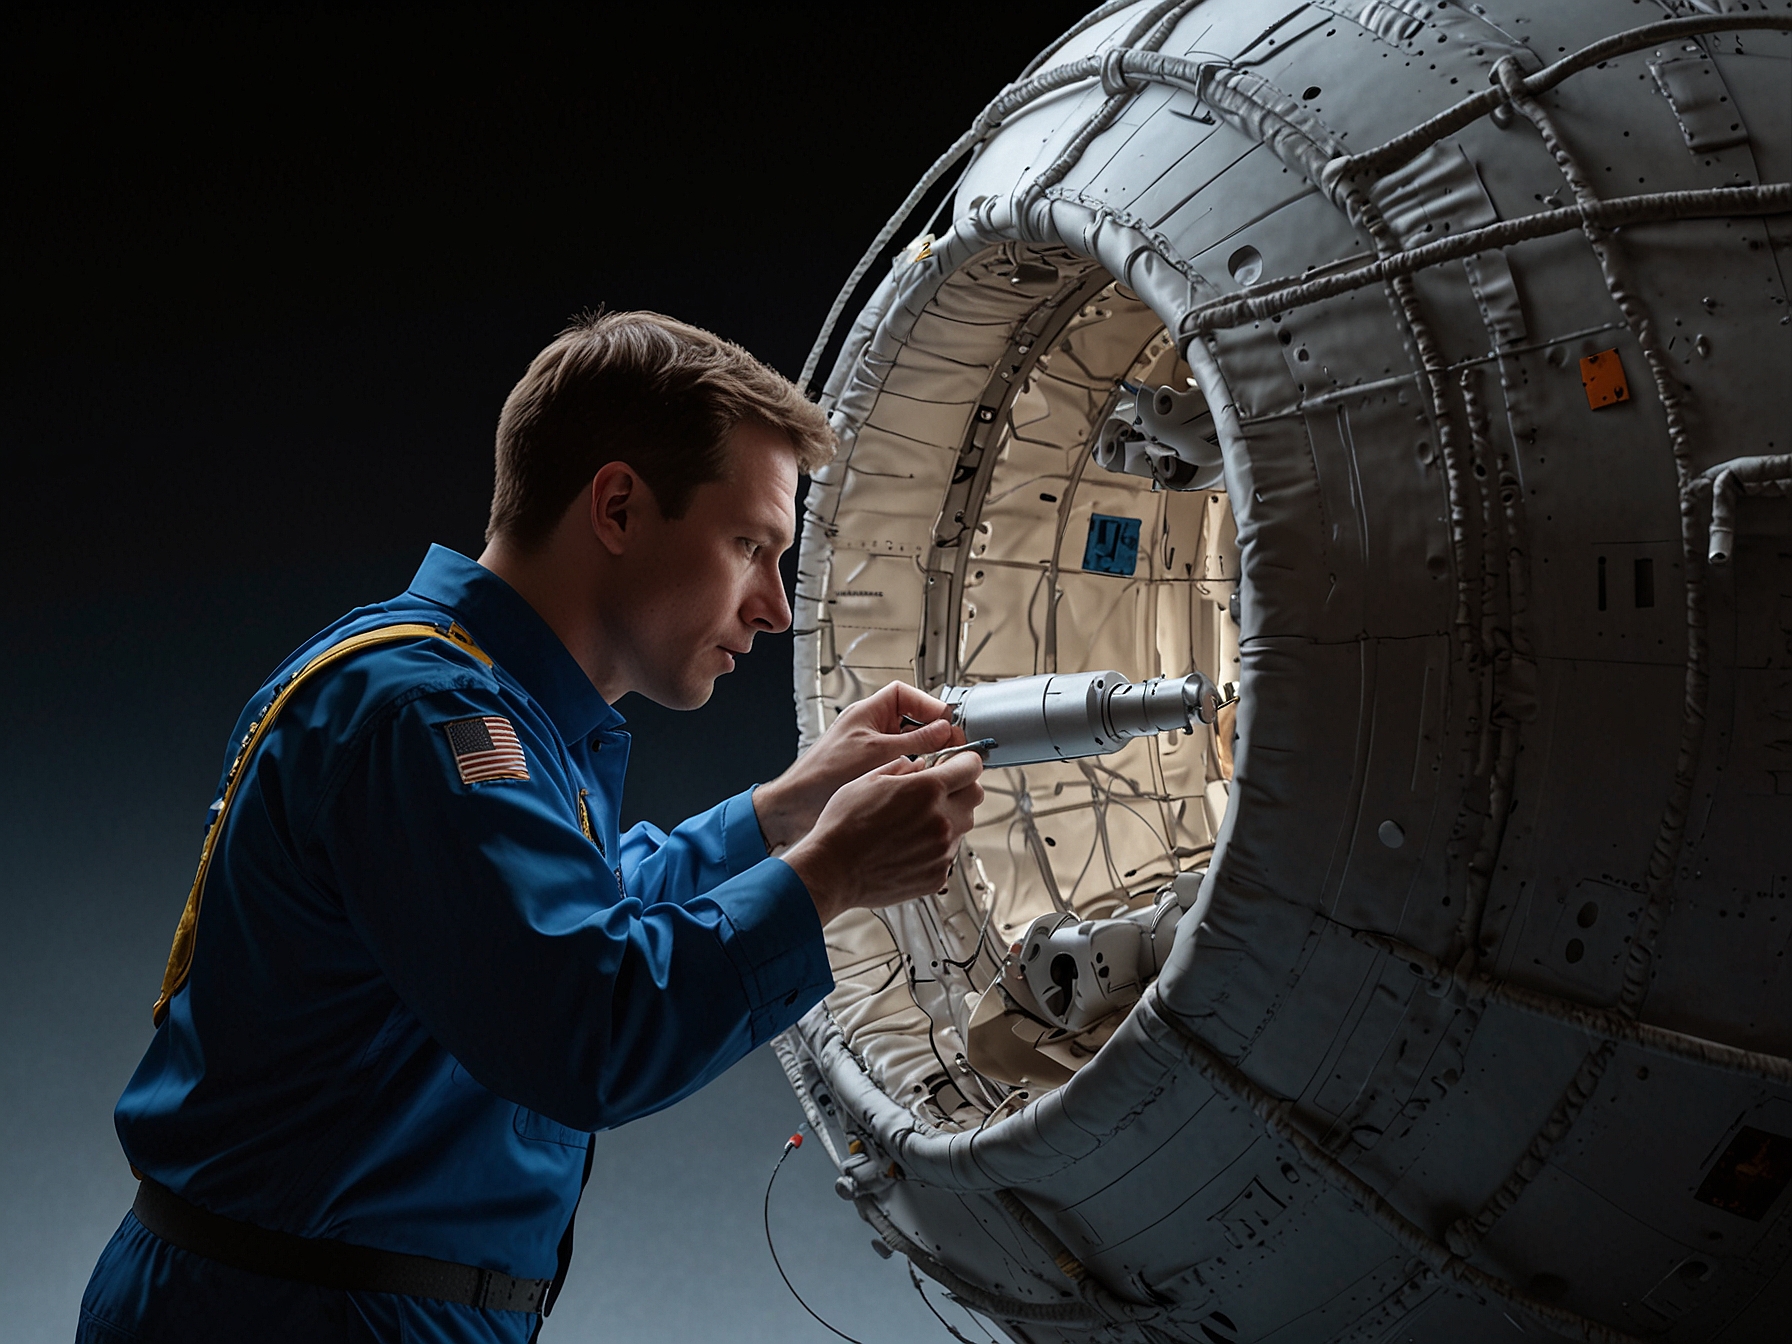 An engineer working on the Starliner capsule's parachute system. The image highlights the technical intricacies involved and the stringent checks that are causing the delays.